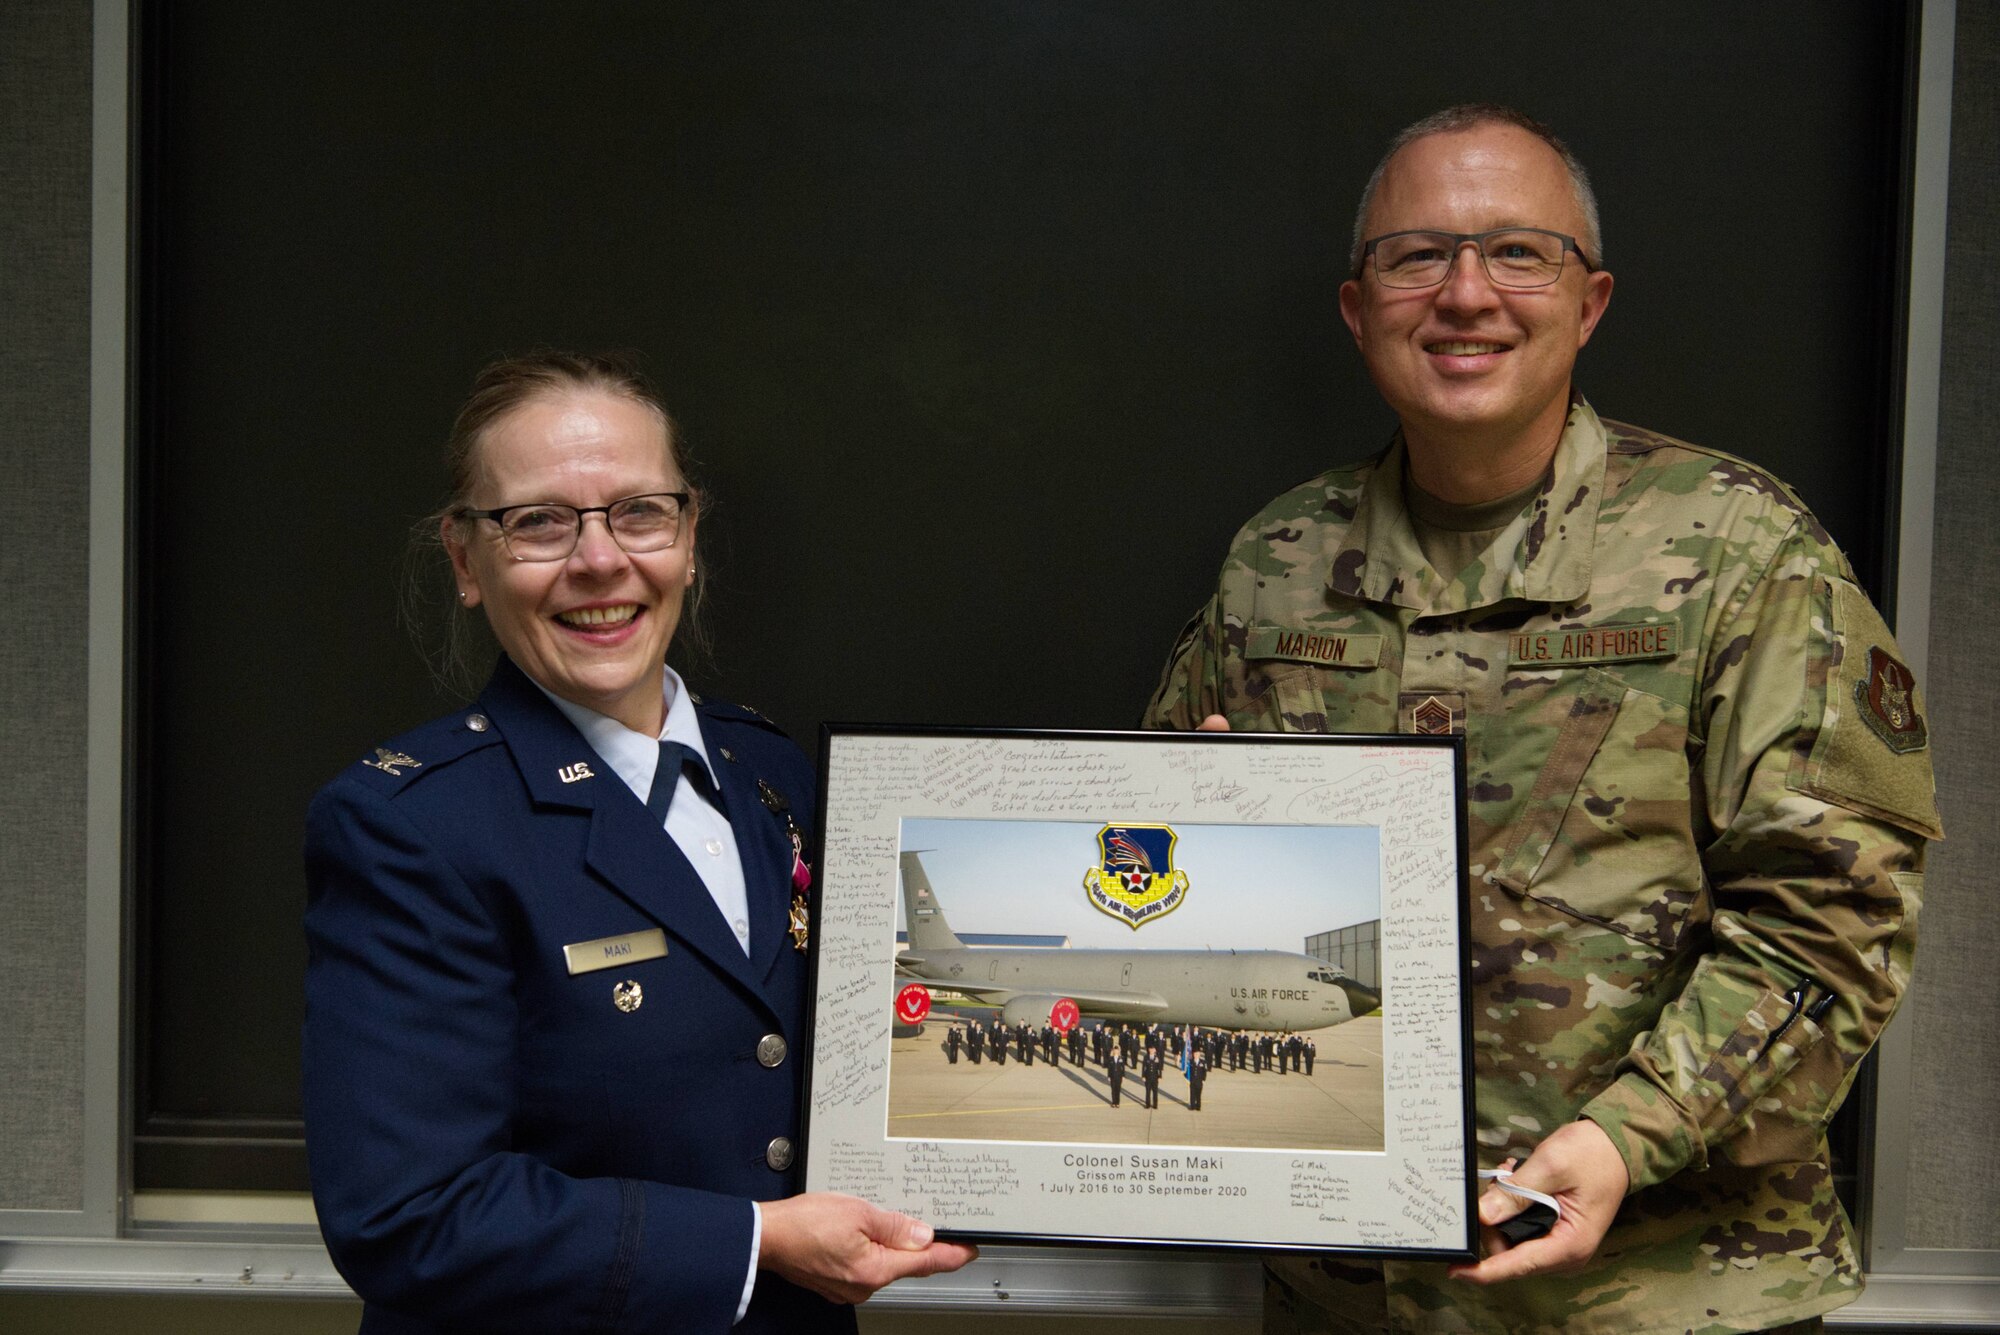 Chief Master Sgt. Wesley Marion, 434th Air Refueling Wing command chief, presents a gift to Col. Susan Maki, 434th ARW inspector general, at a retirement ceremony at Grissom Air Reserve Base, Ind., Sept. 12, 2020. Maki retired after 32 years of service in the Minnesota Air Guard and Air Force Reserve. (U.S. Air Force Photo / A1C Harrison Withrow)